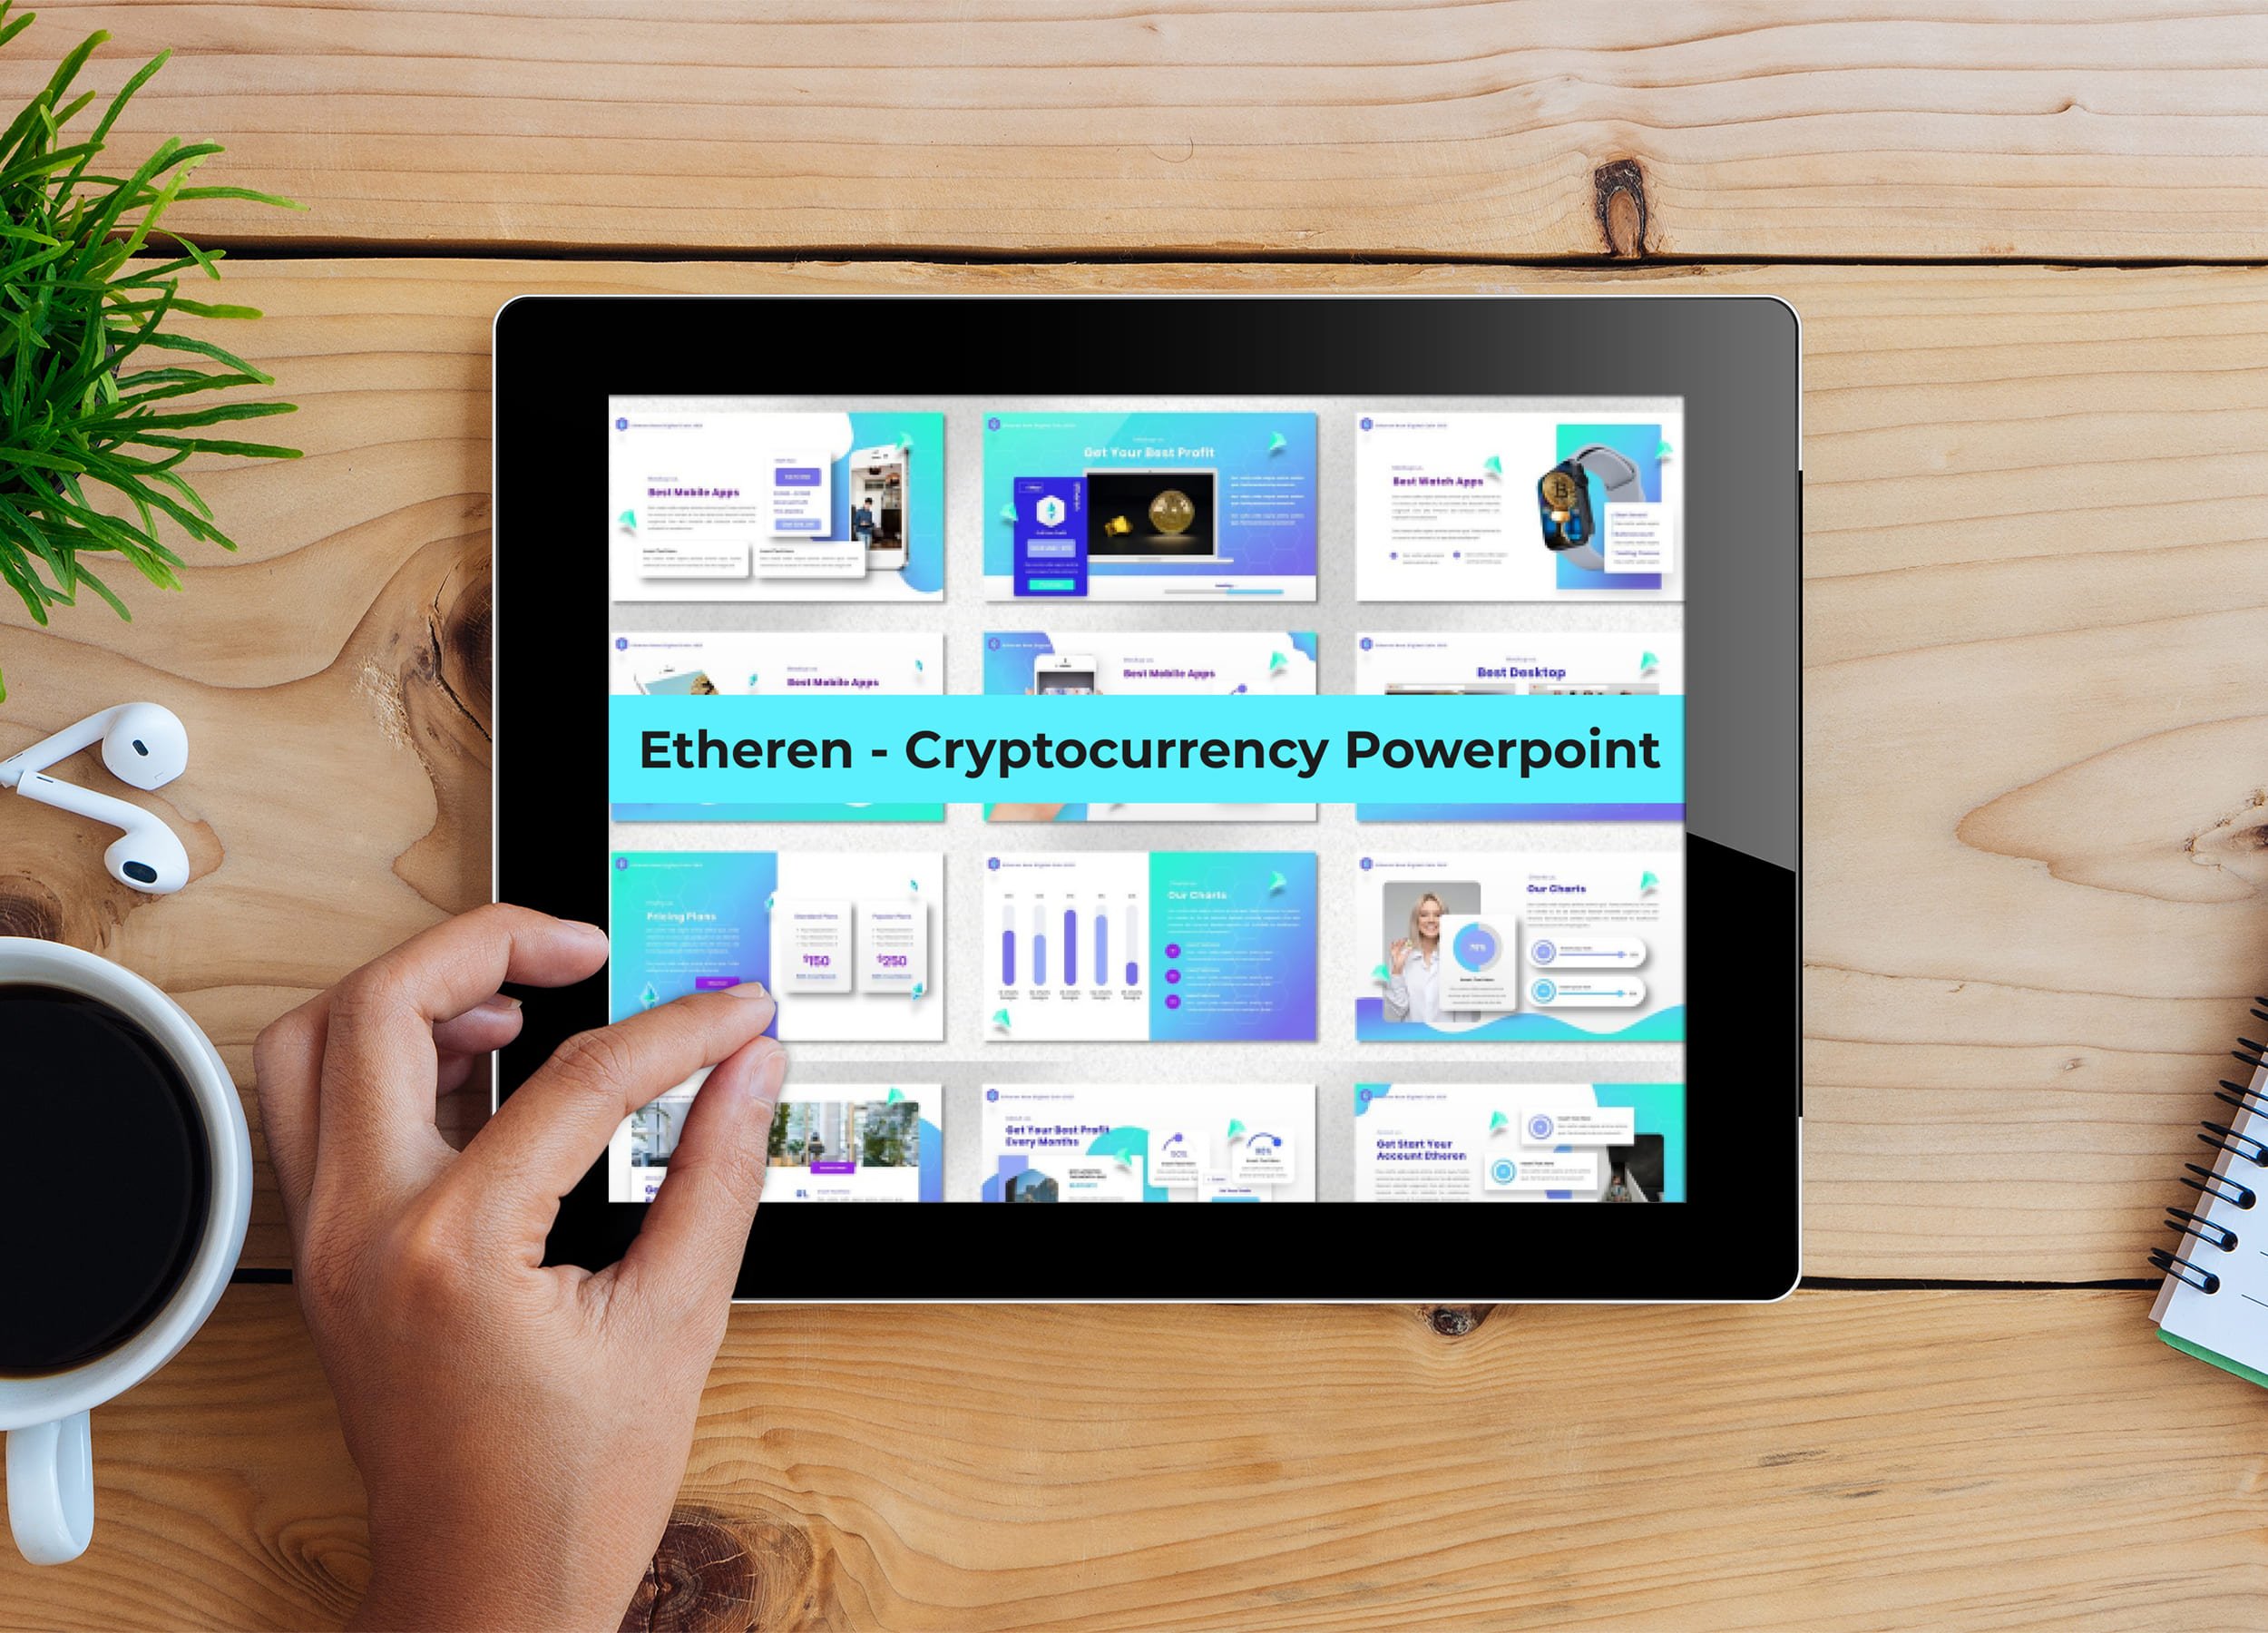 Tablet option of the Etheren - Cryptocurrency Powerpoint.